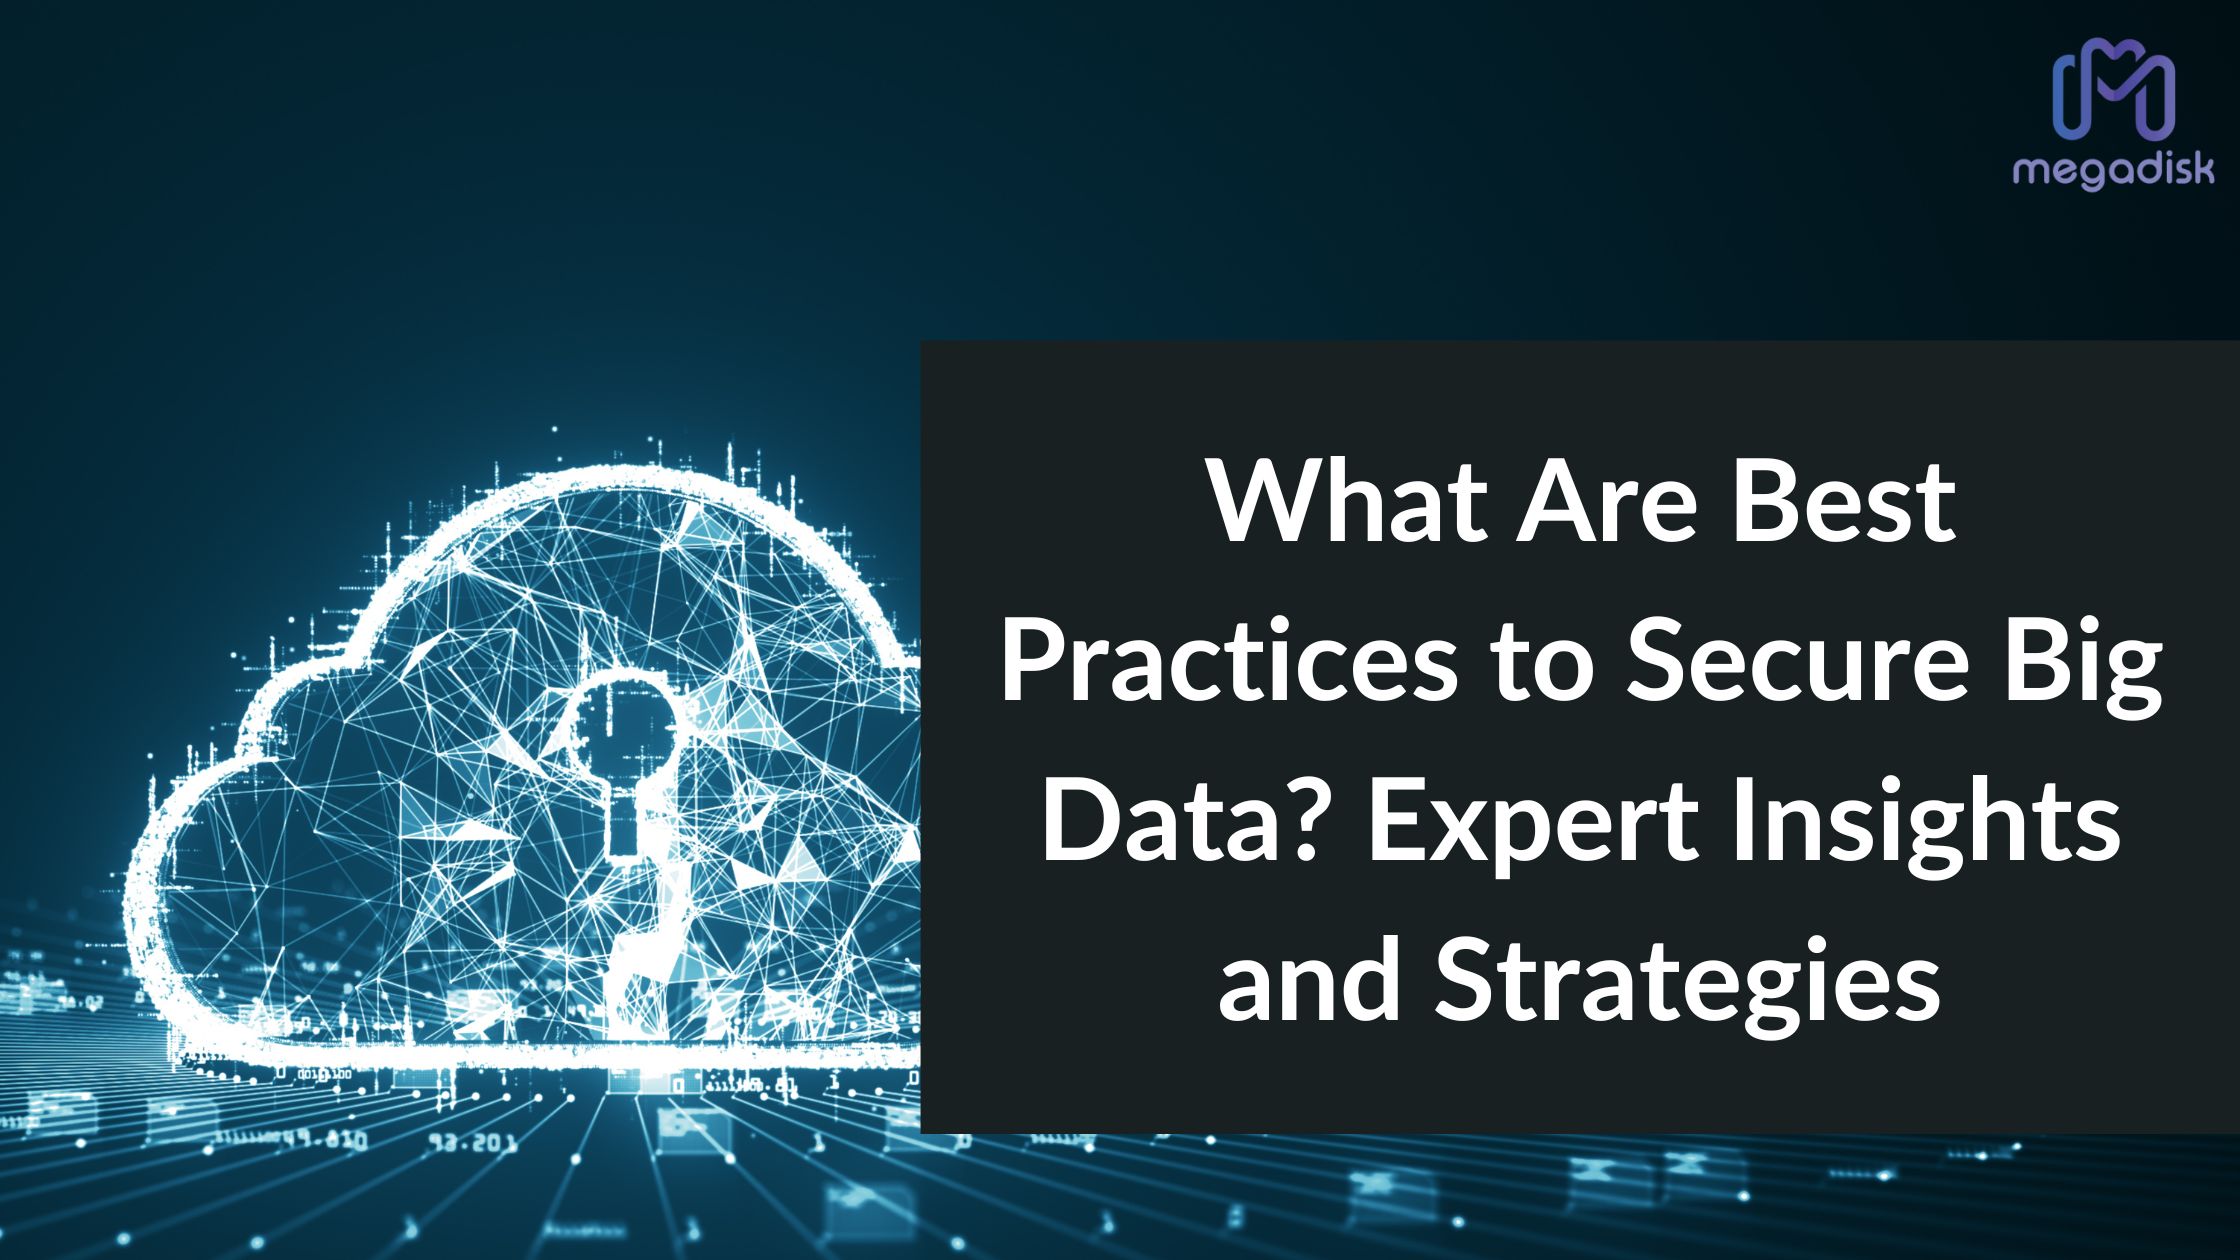 What Are Best Practices to Secure Big Data? Expert Insights and Strategies